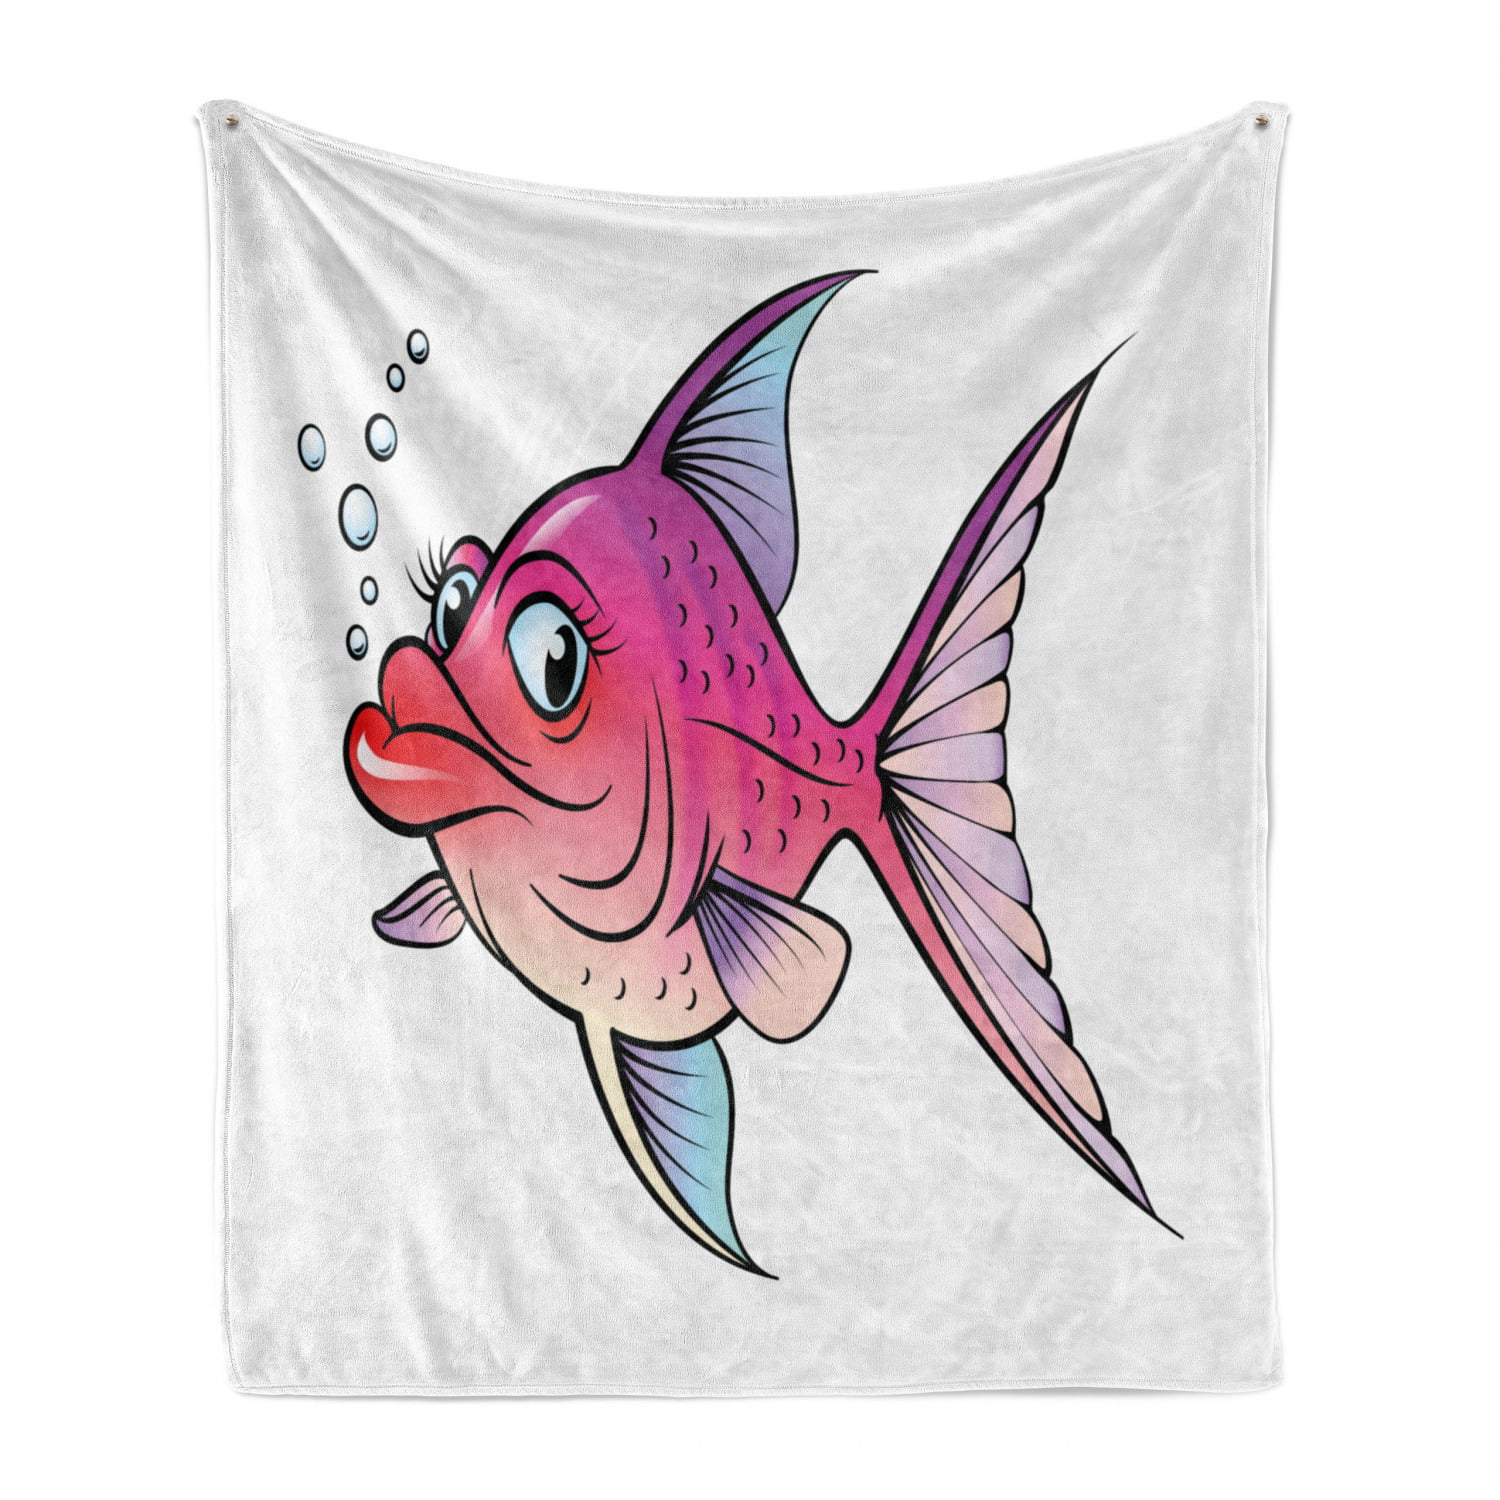 Fish Soft Flannel Fleece Throw Blanket, Cartoon Style Smiling Female  Goldfish with Plump Lips Underwater Comic, Cozy Plush for Indoor and  Outdoor Use, 50